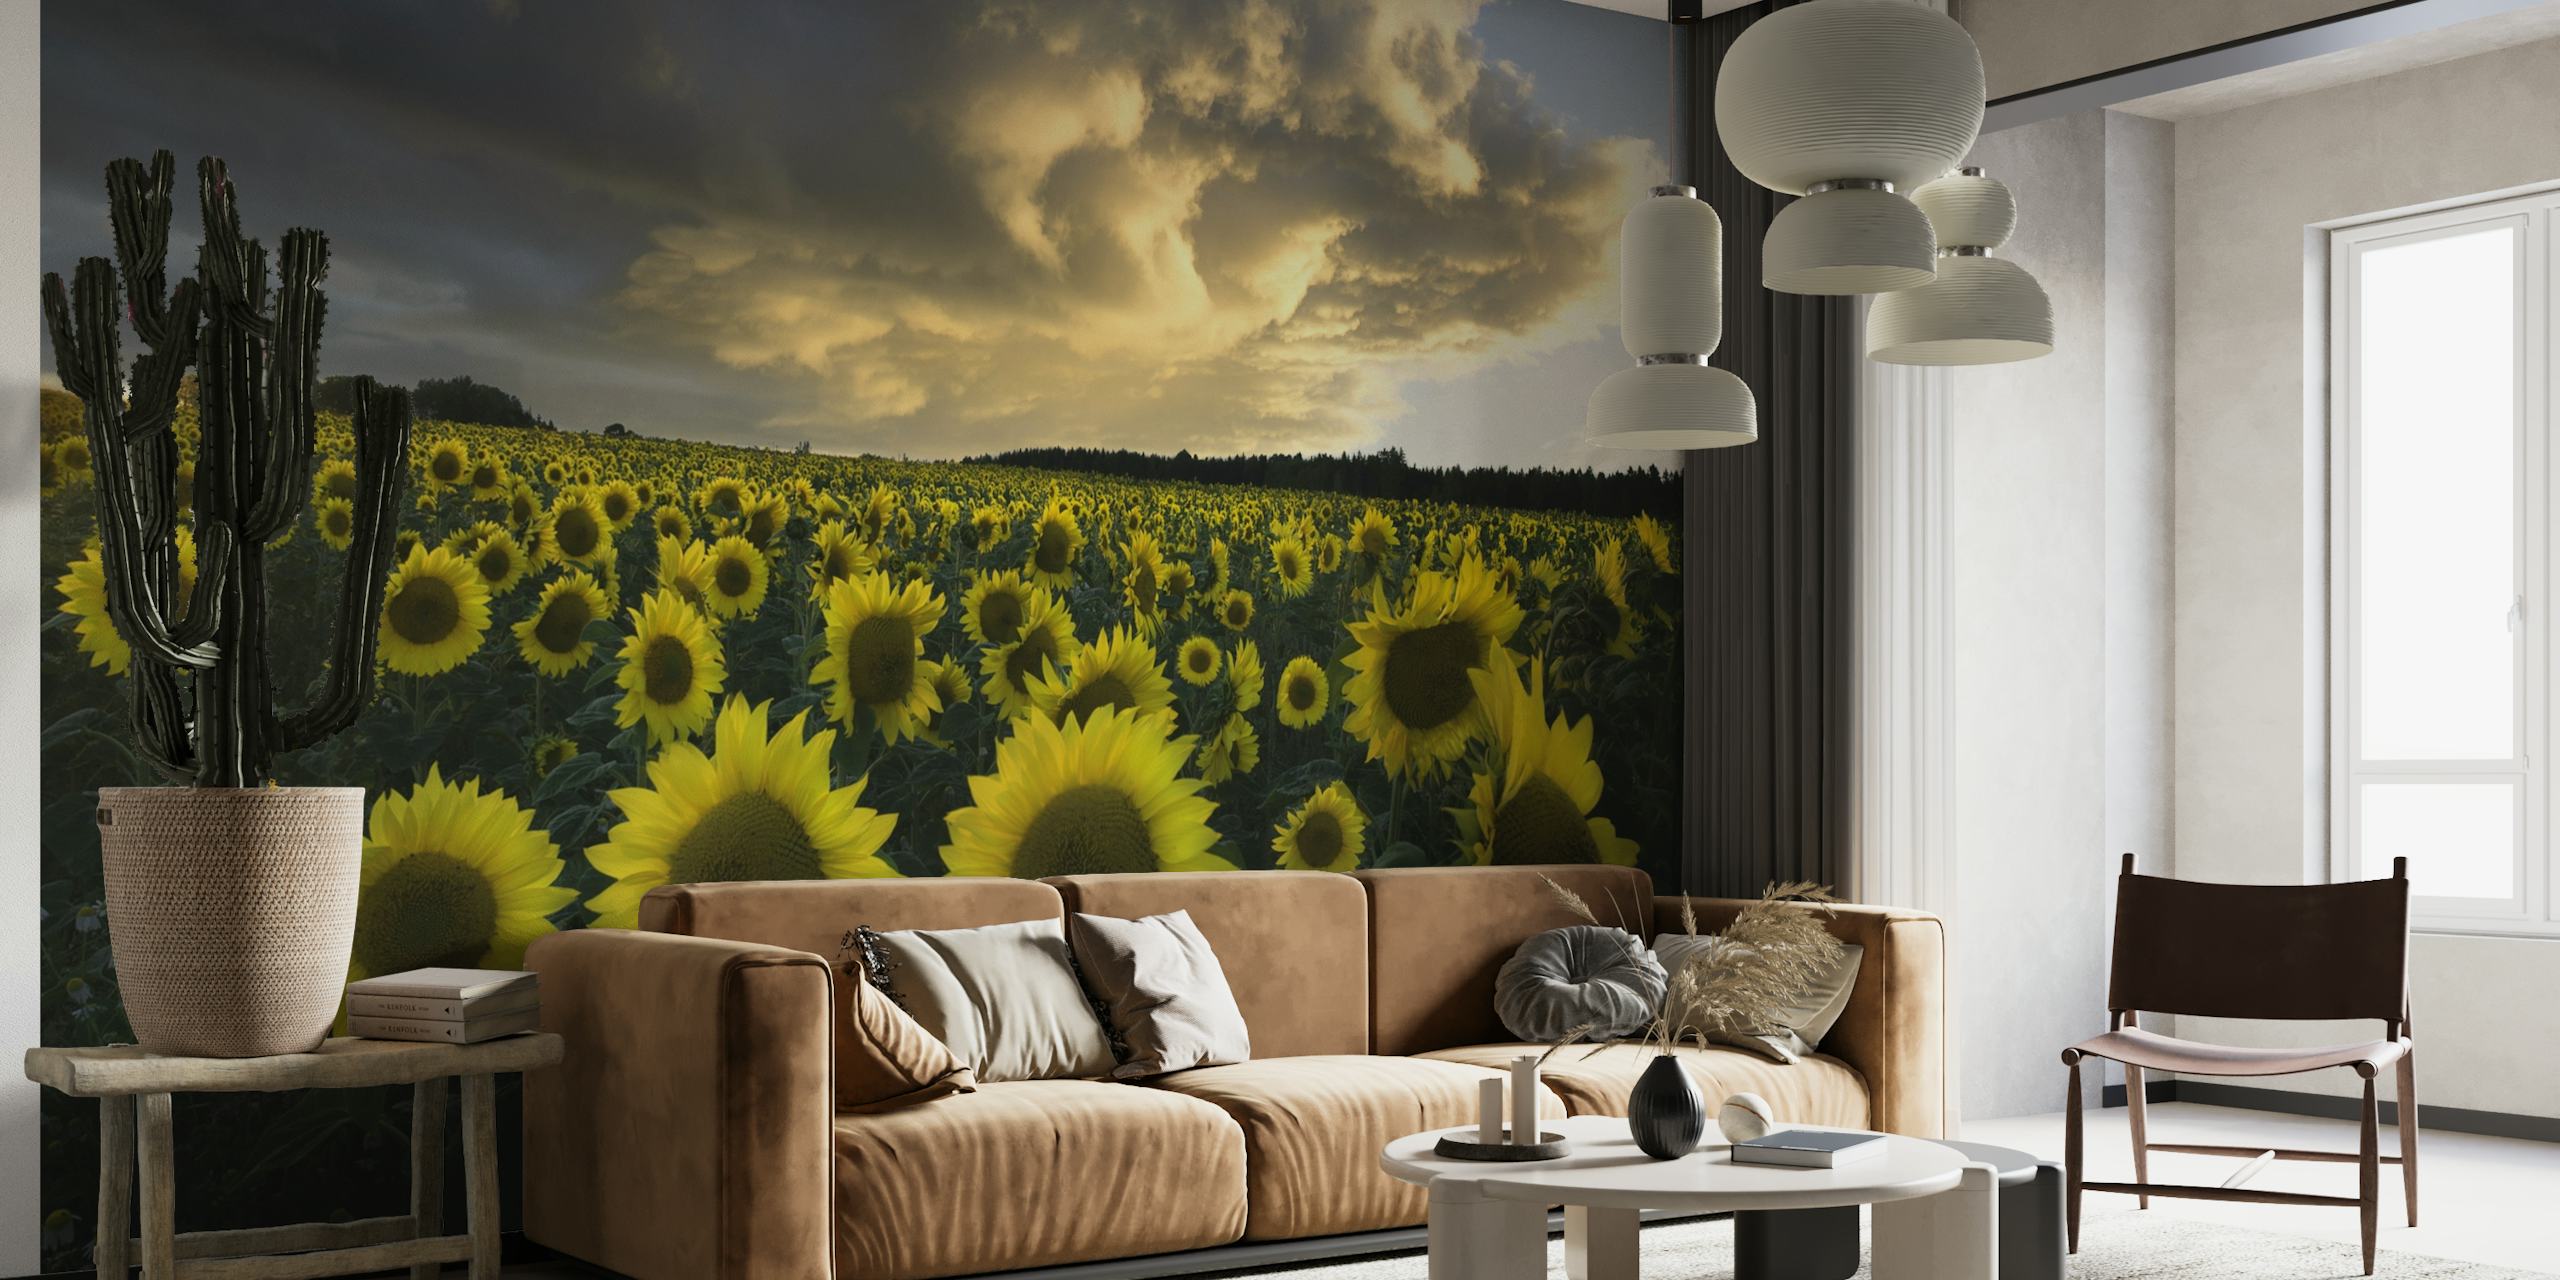 Sunflowers in Sweden wall mural showcasing a field of blooming sunflowers under a cloudy sky